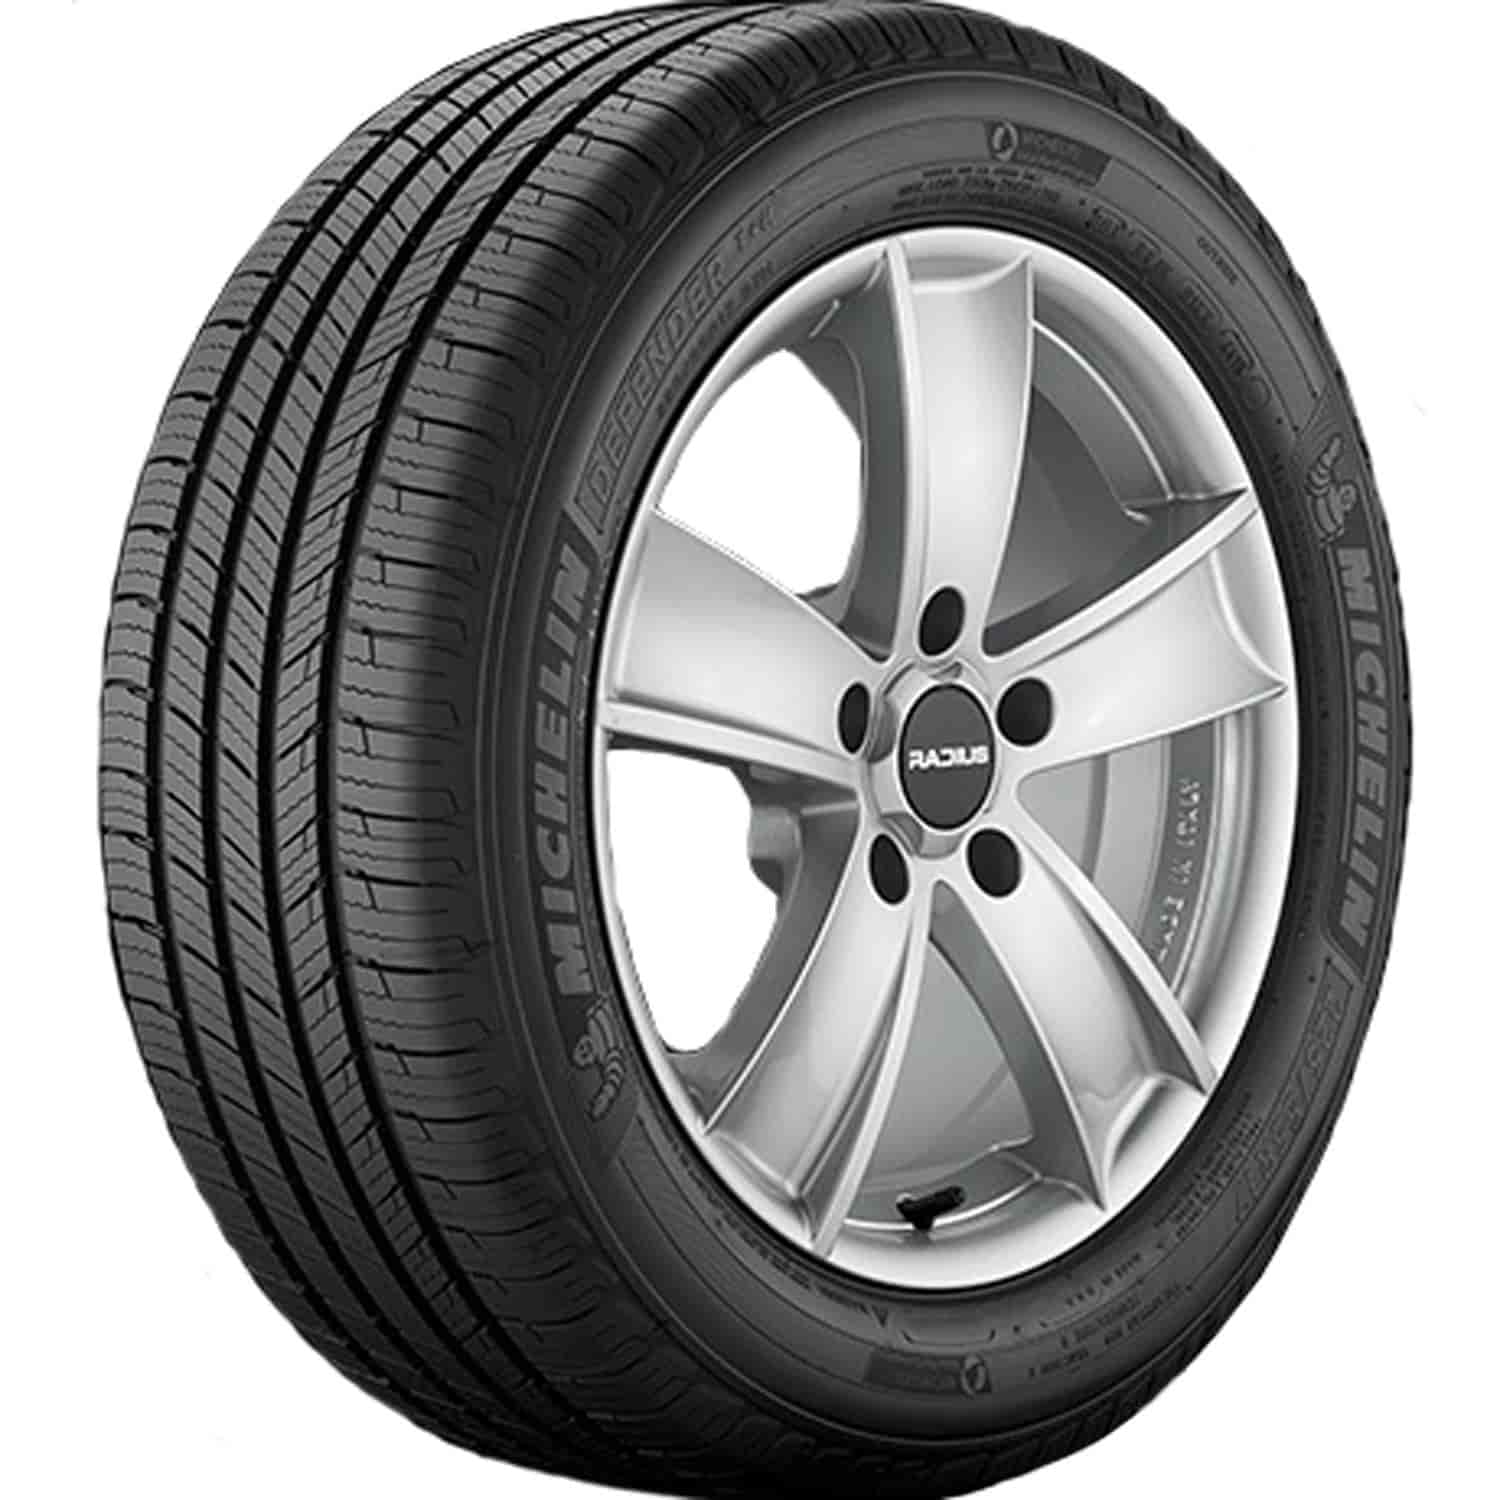 Defender T+H Tire Size:215/65R16